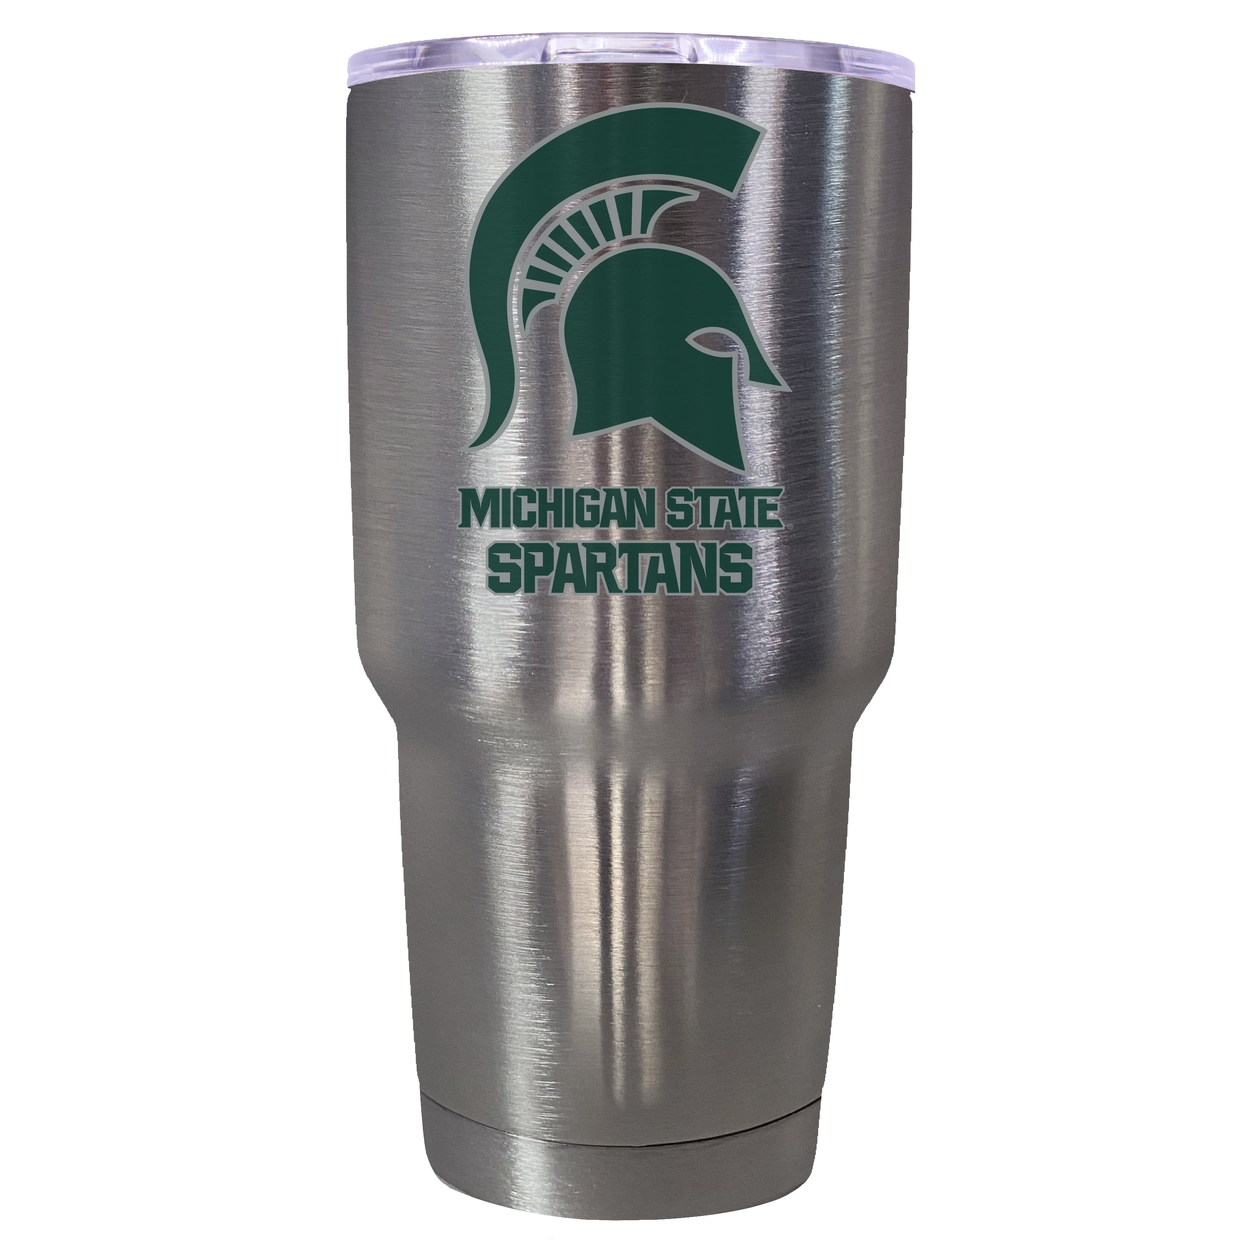 Michigan State Spartans 24 Oz Insulated Stainless Steel Tumbler